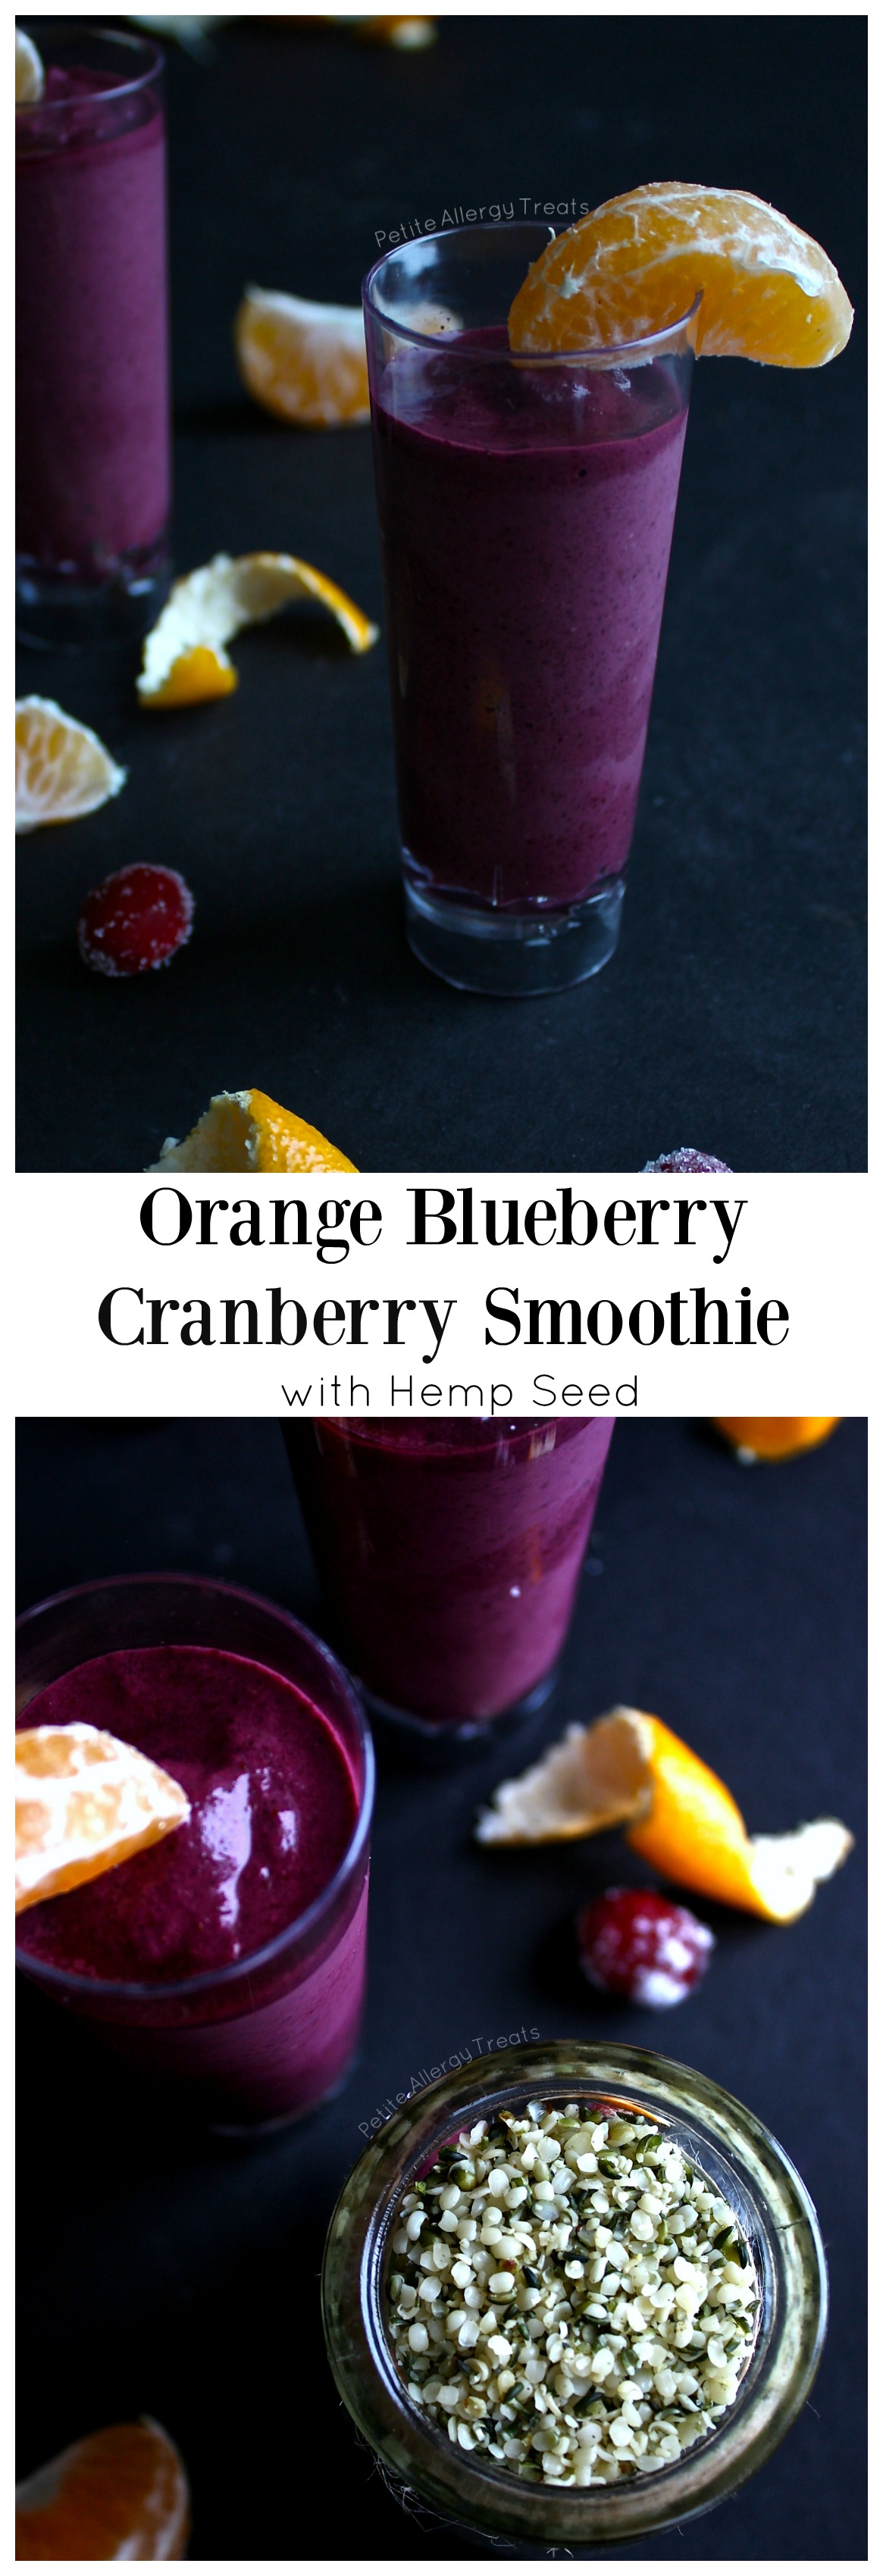 Blueberry Orange Cranberry Hemp Smoothie - Easy breakfast smoothie full of rich antioxidants and protein.